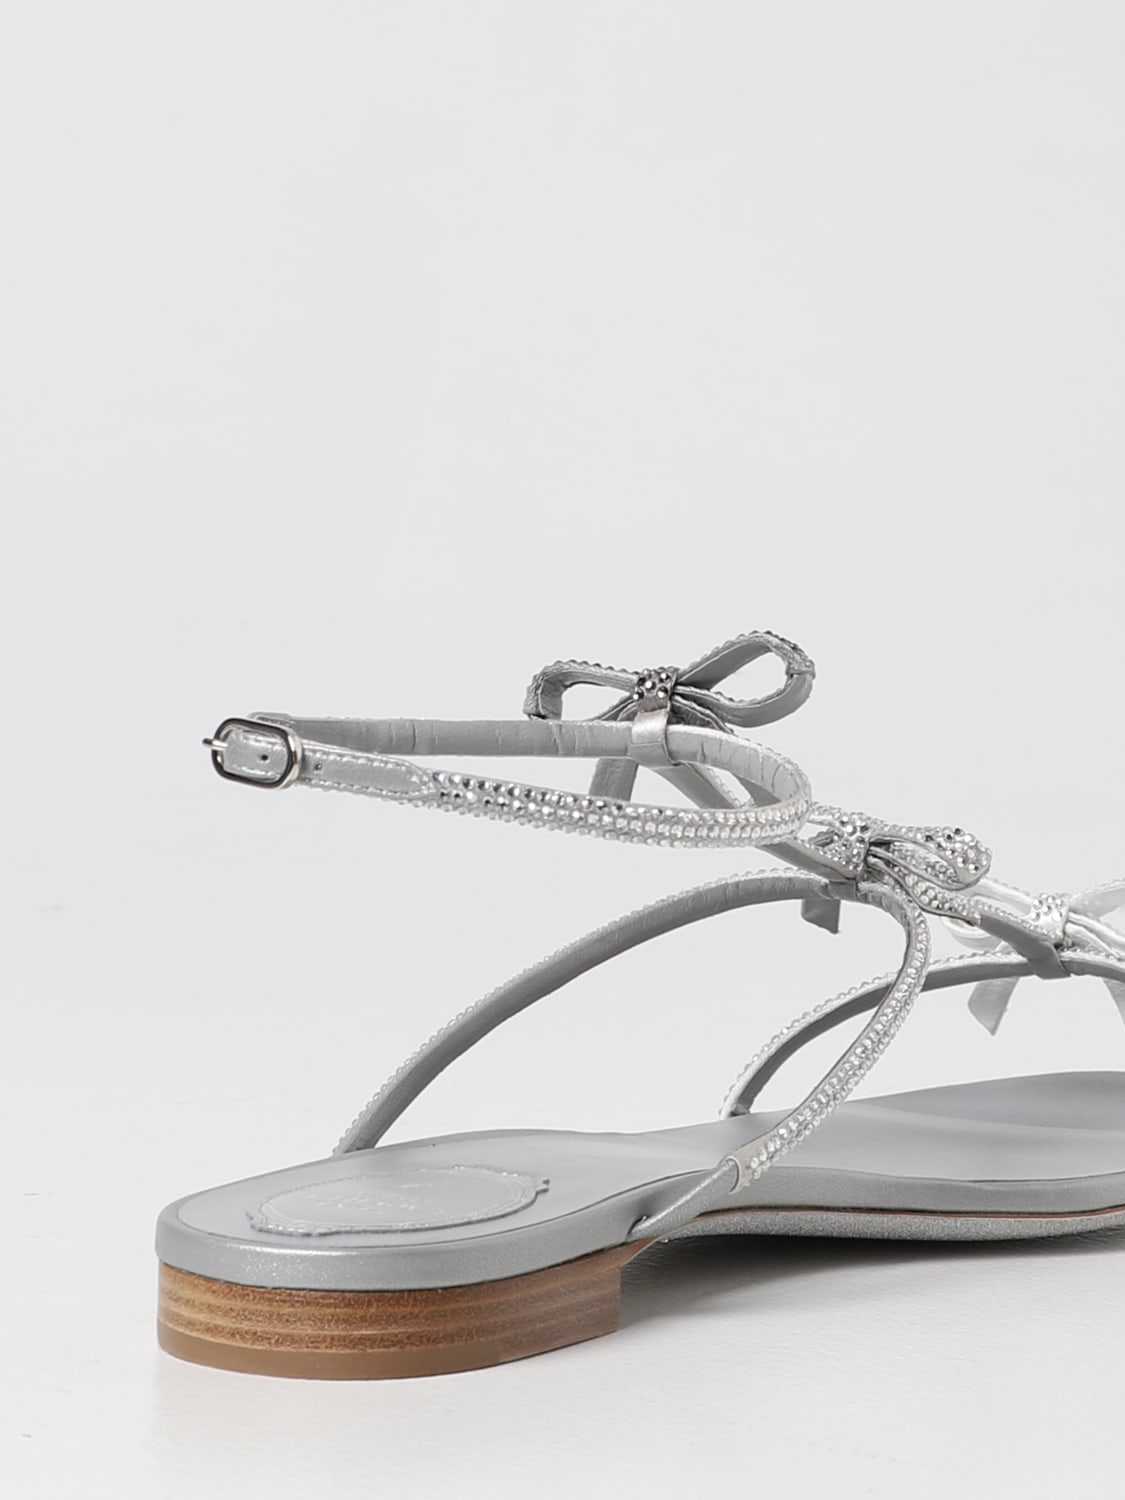 Rene Caovilla Outlet: Caterina sandals in satin with rhinestone ...